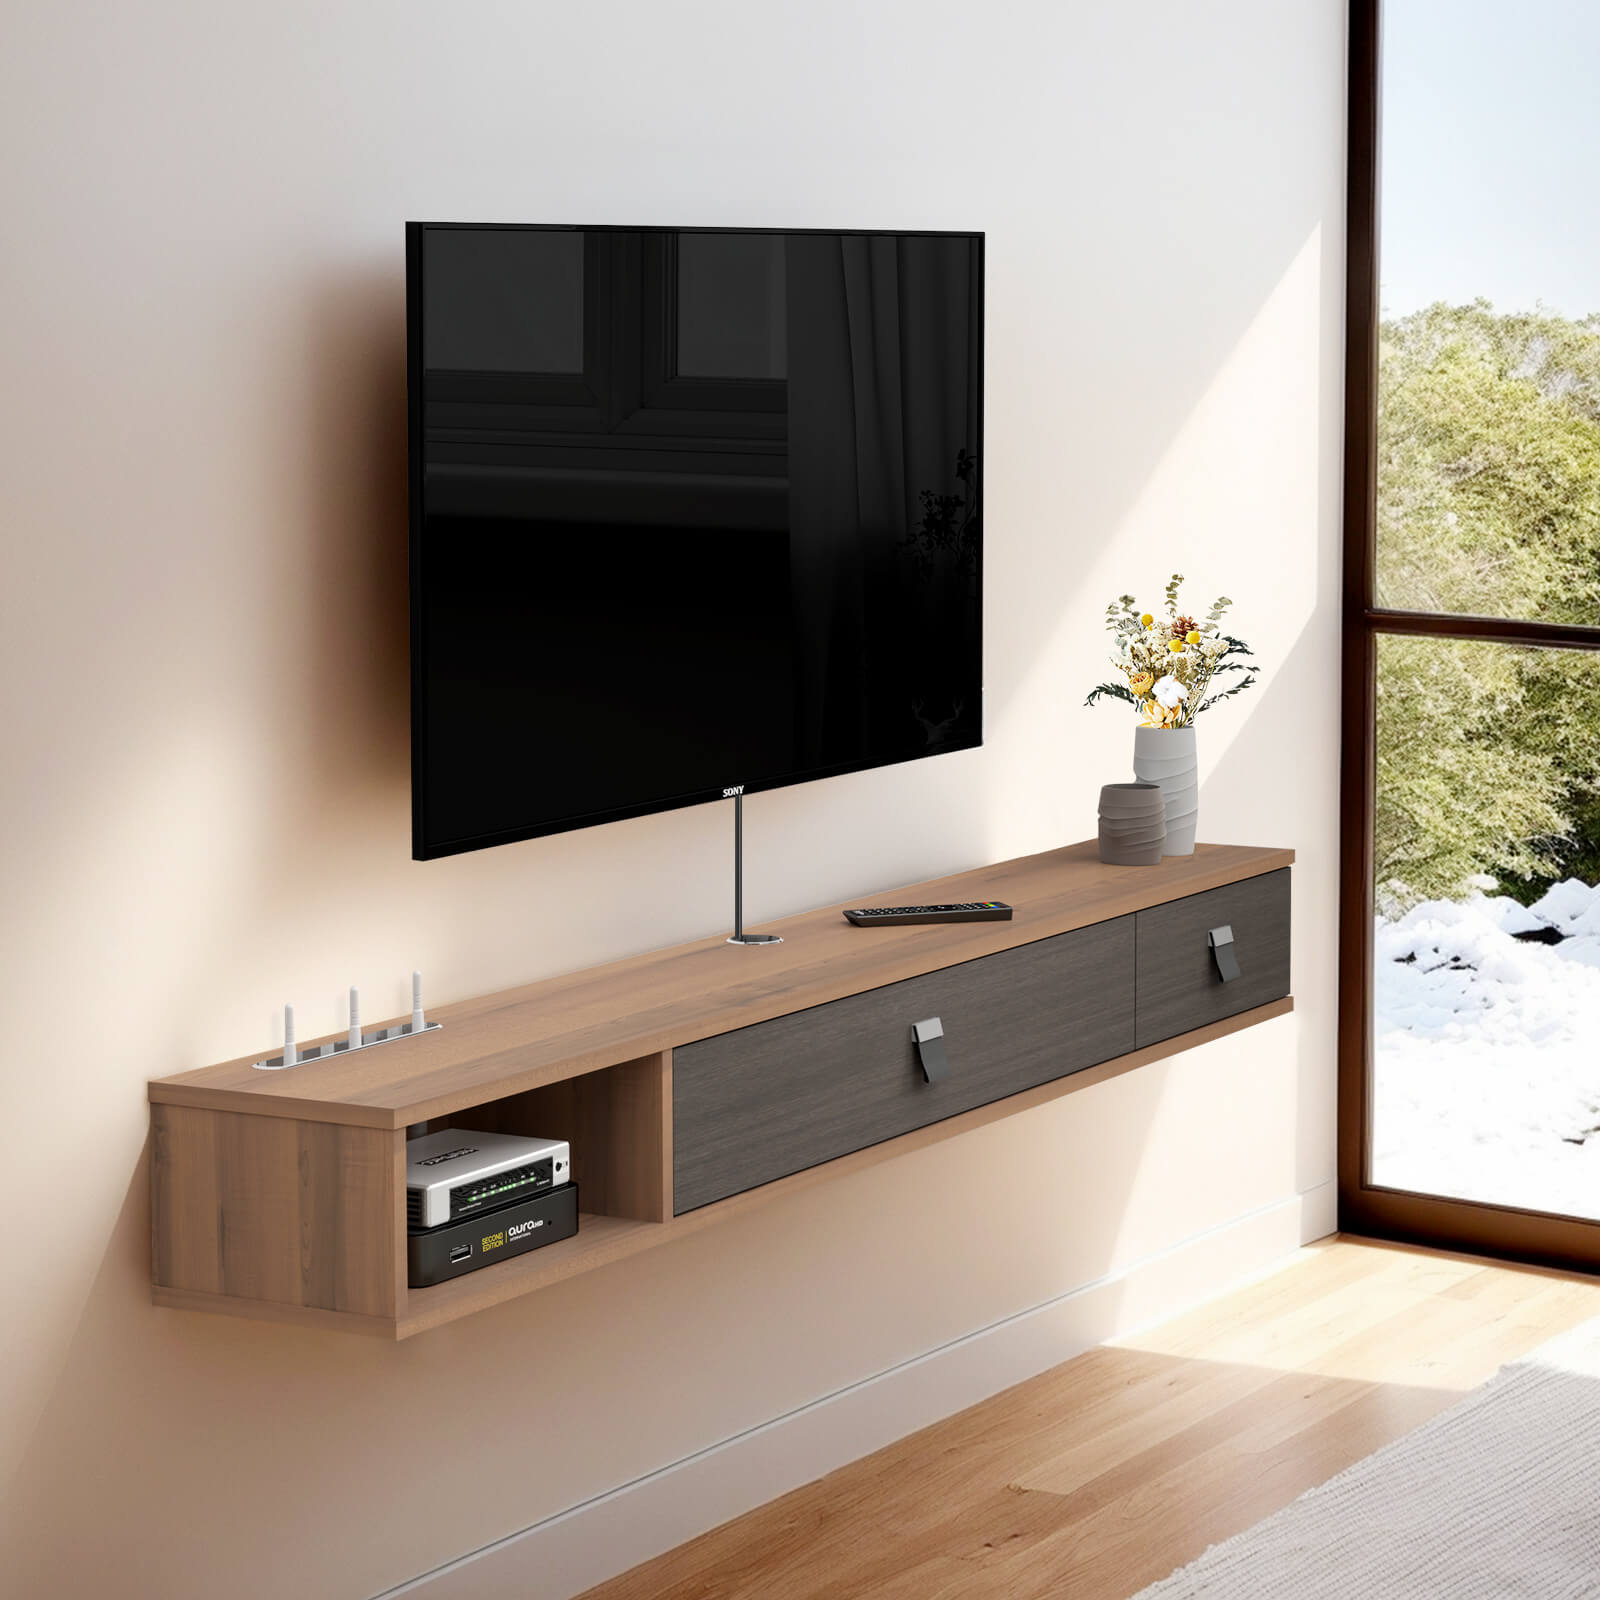 55.1" Plywood Floating TV Stand Wall Shelf with Two Doors for 55" 60" Televisions, Walnut